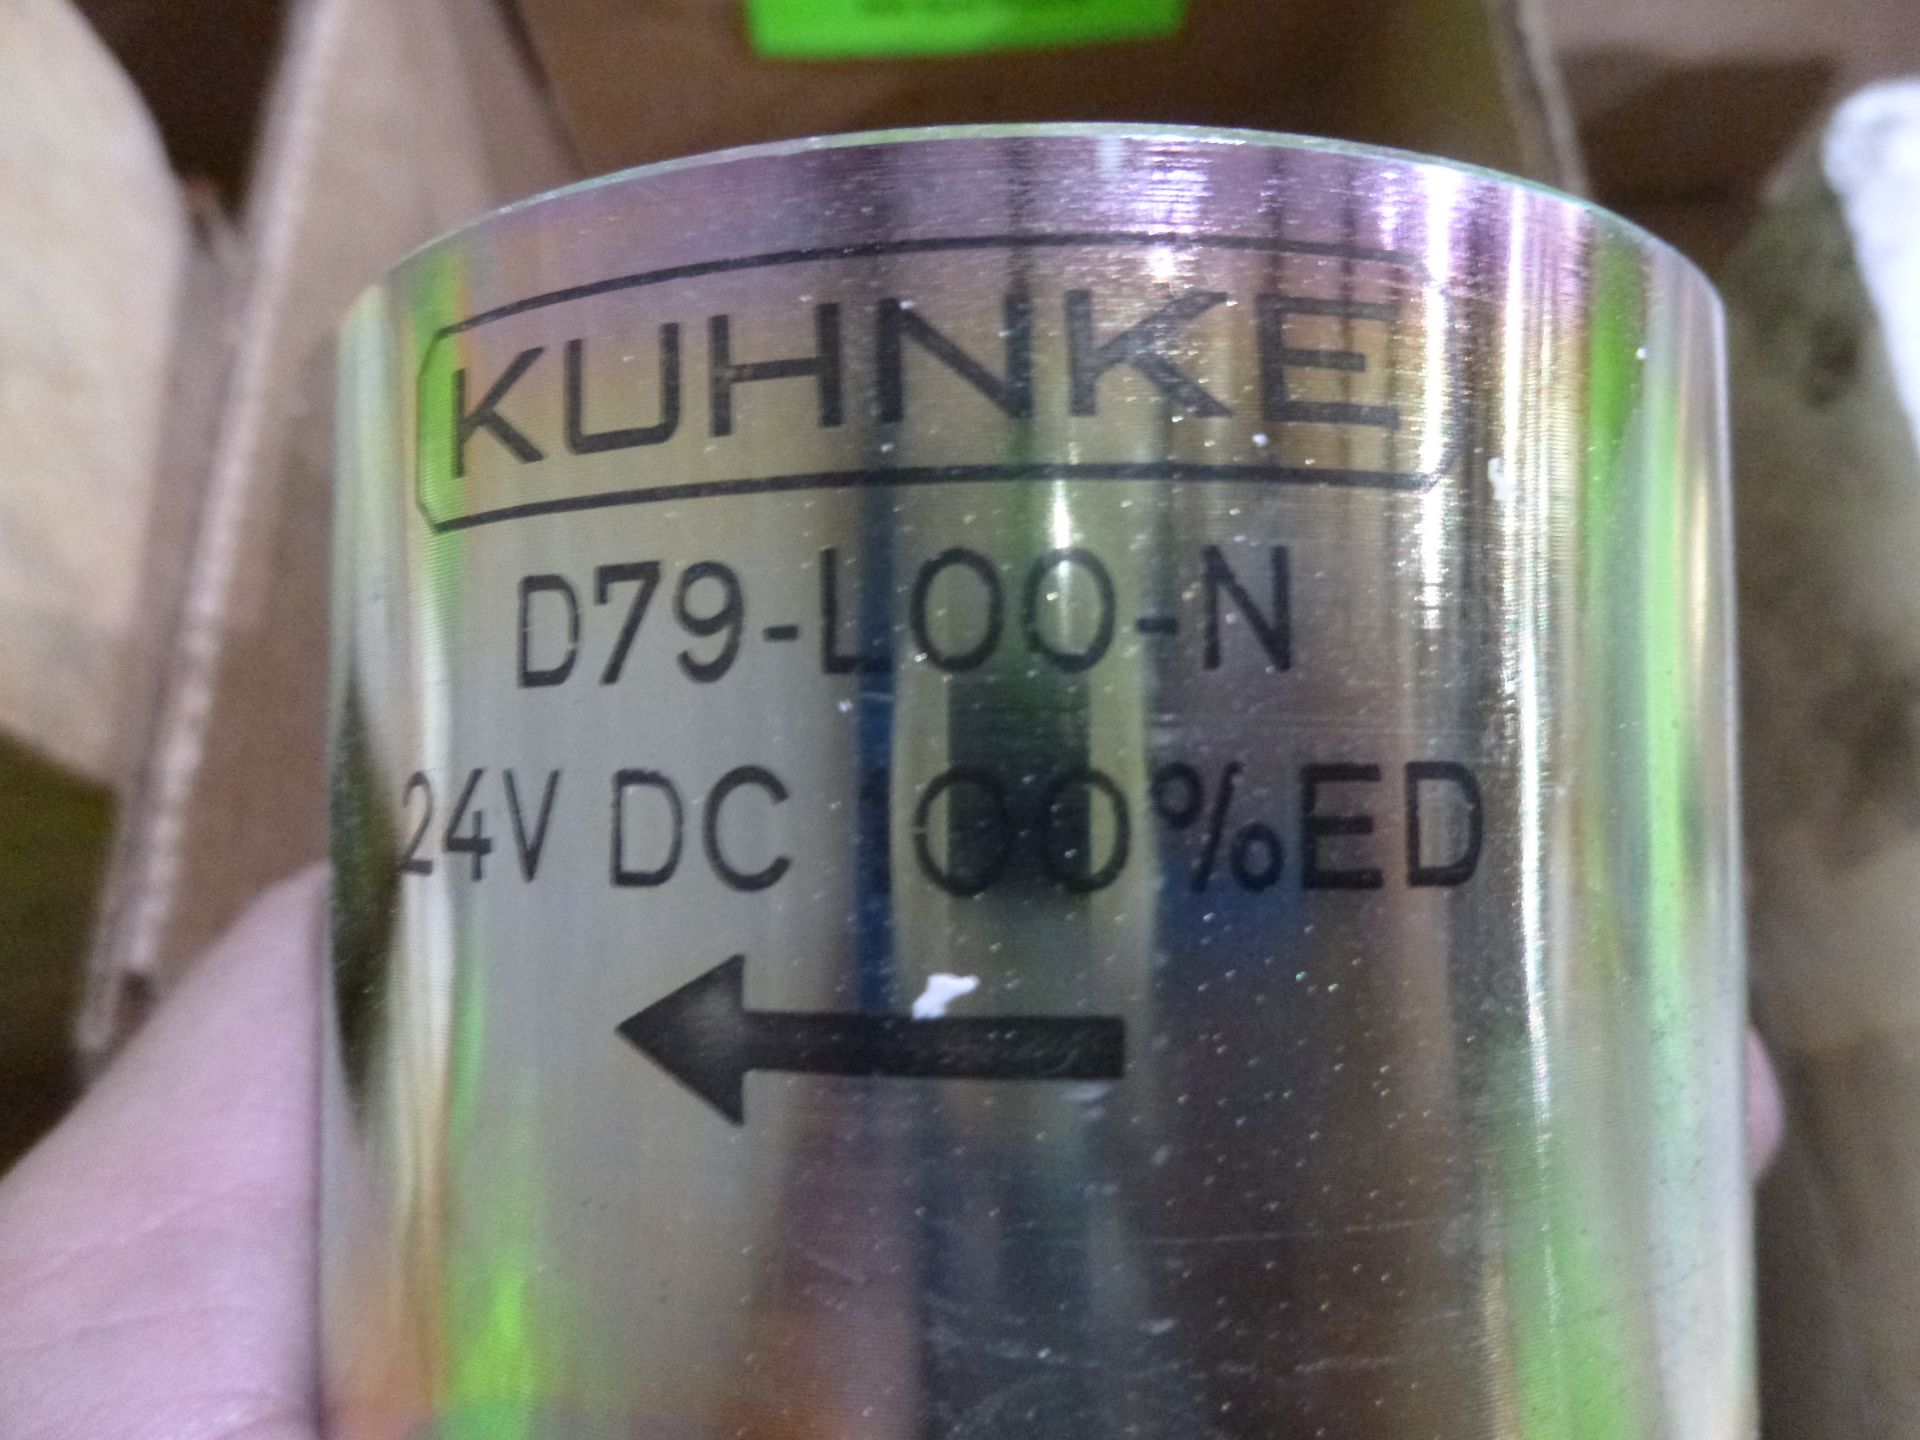 Kuhnke Model D79-L00-N, new as pictured, as always with Brolyn LLC auctions, all lots can be - Image 2 of 2